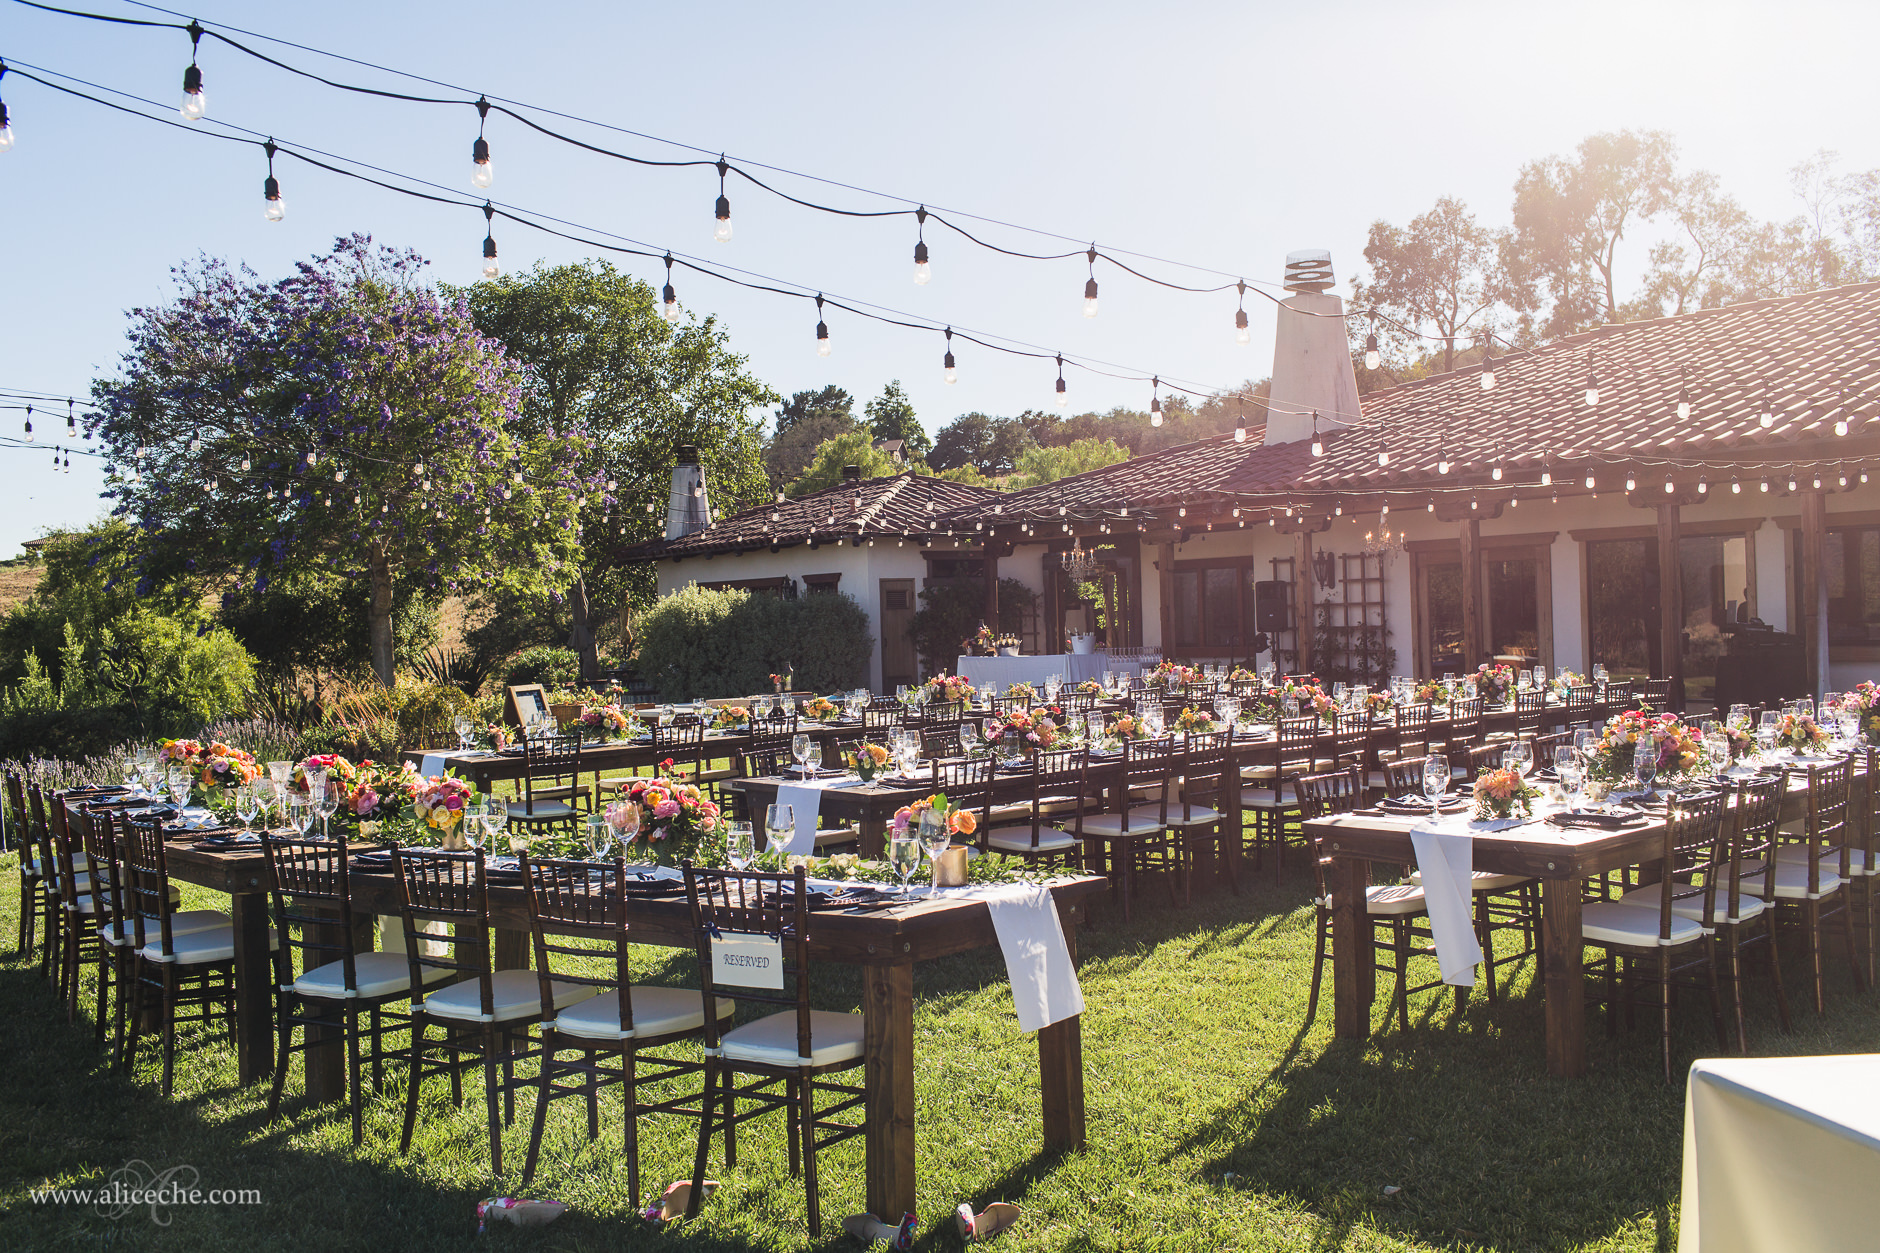 Casitas Estate Wedding Photos Reception Setting with Farm Tables and String Lights